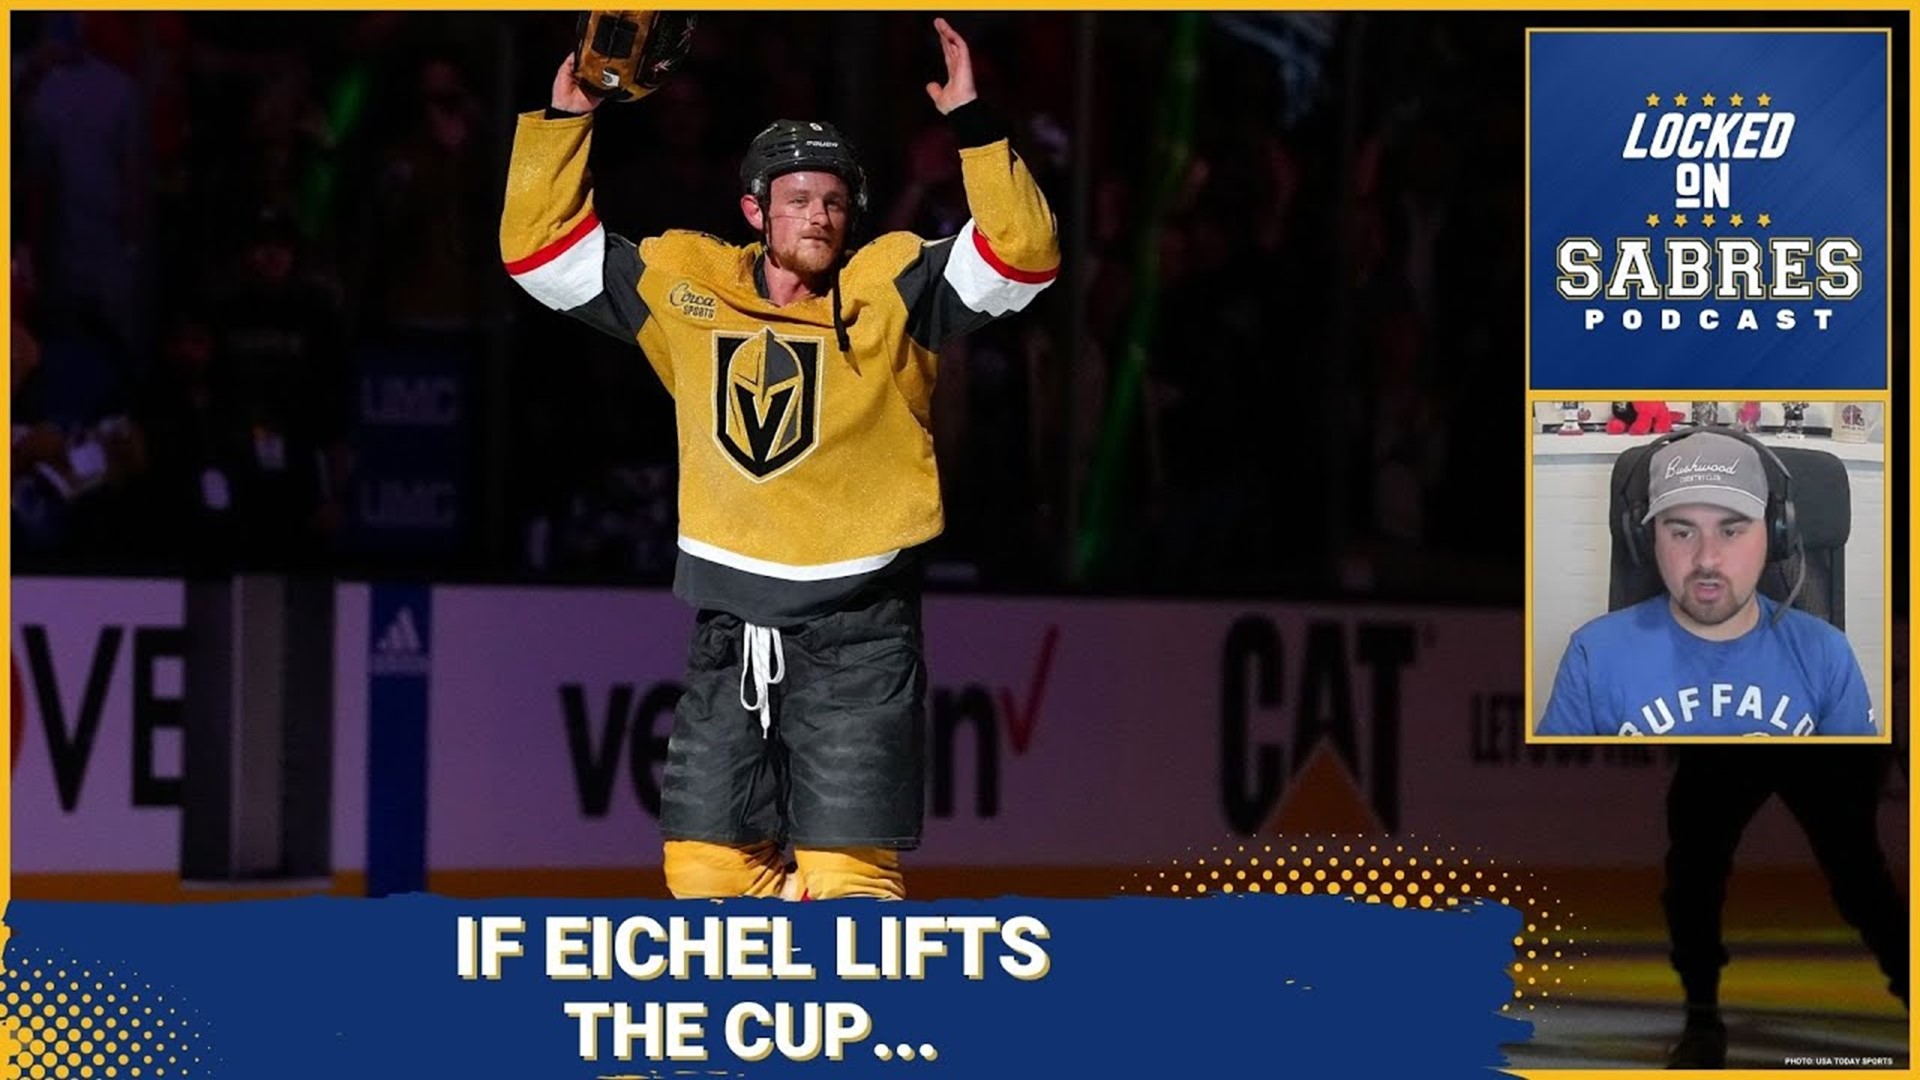 If Jack Eichel lifts the Stanley Cup...